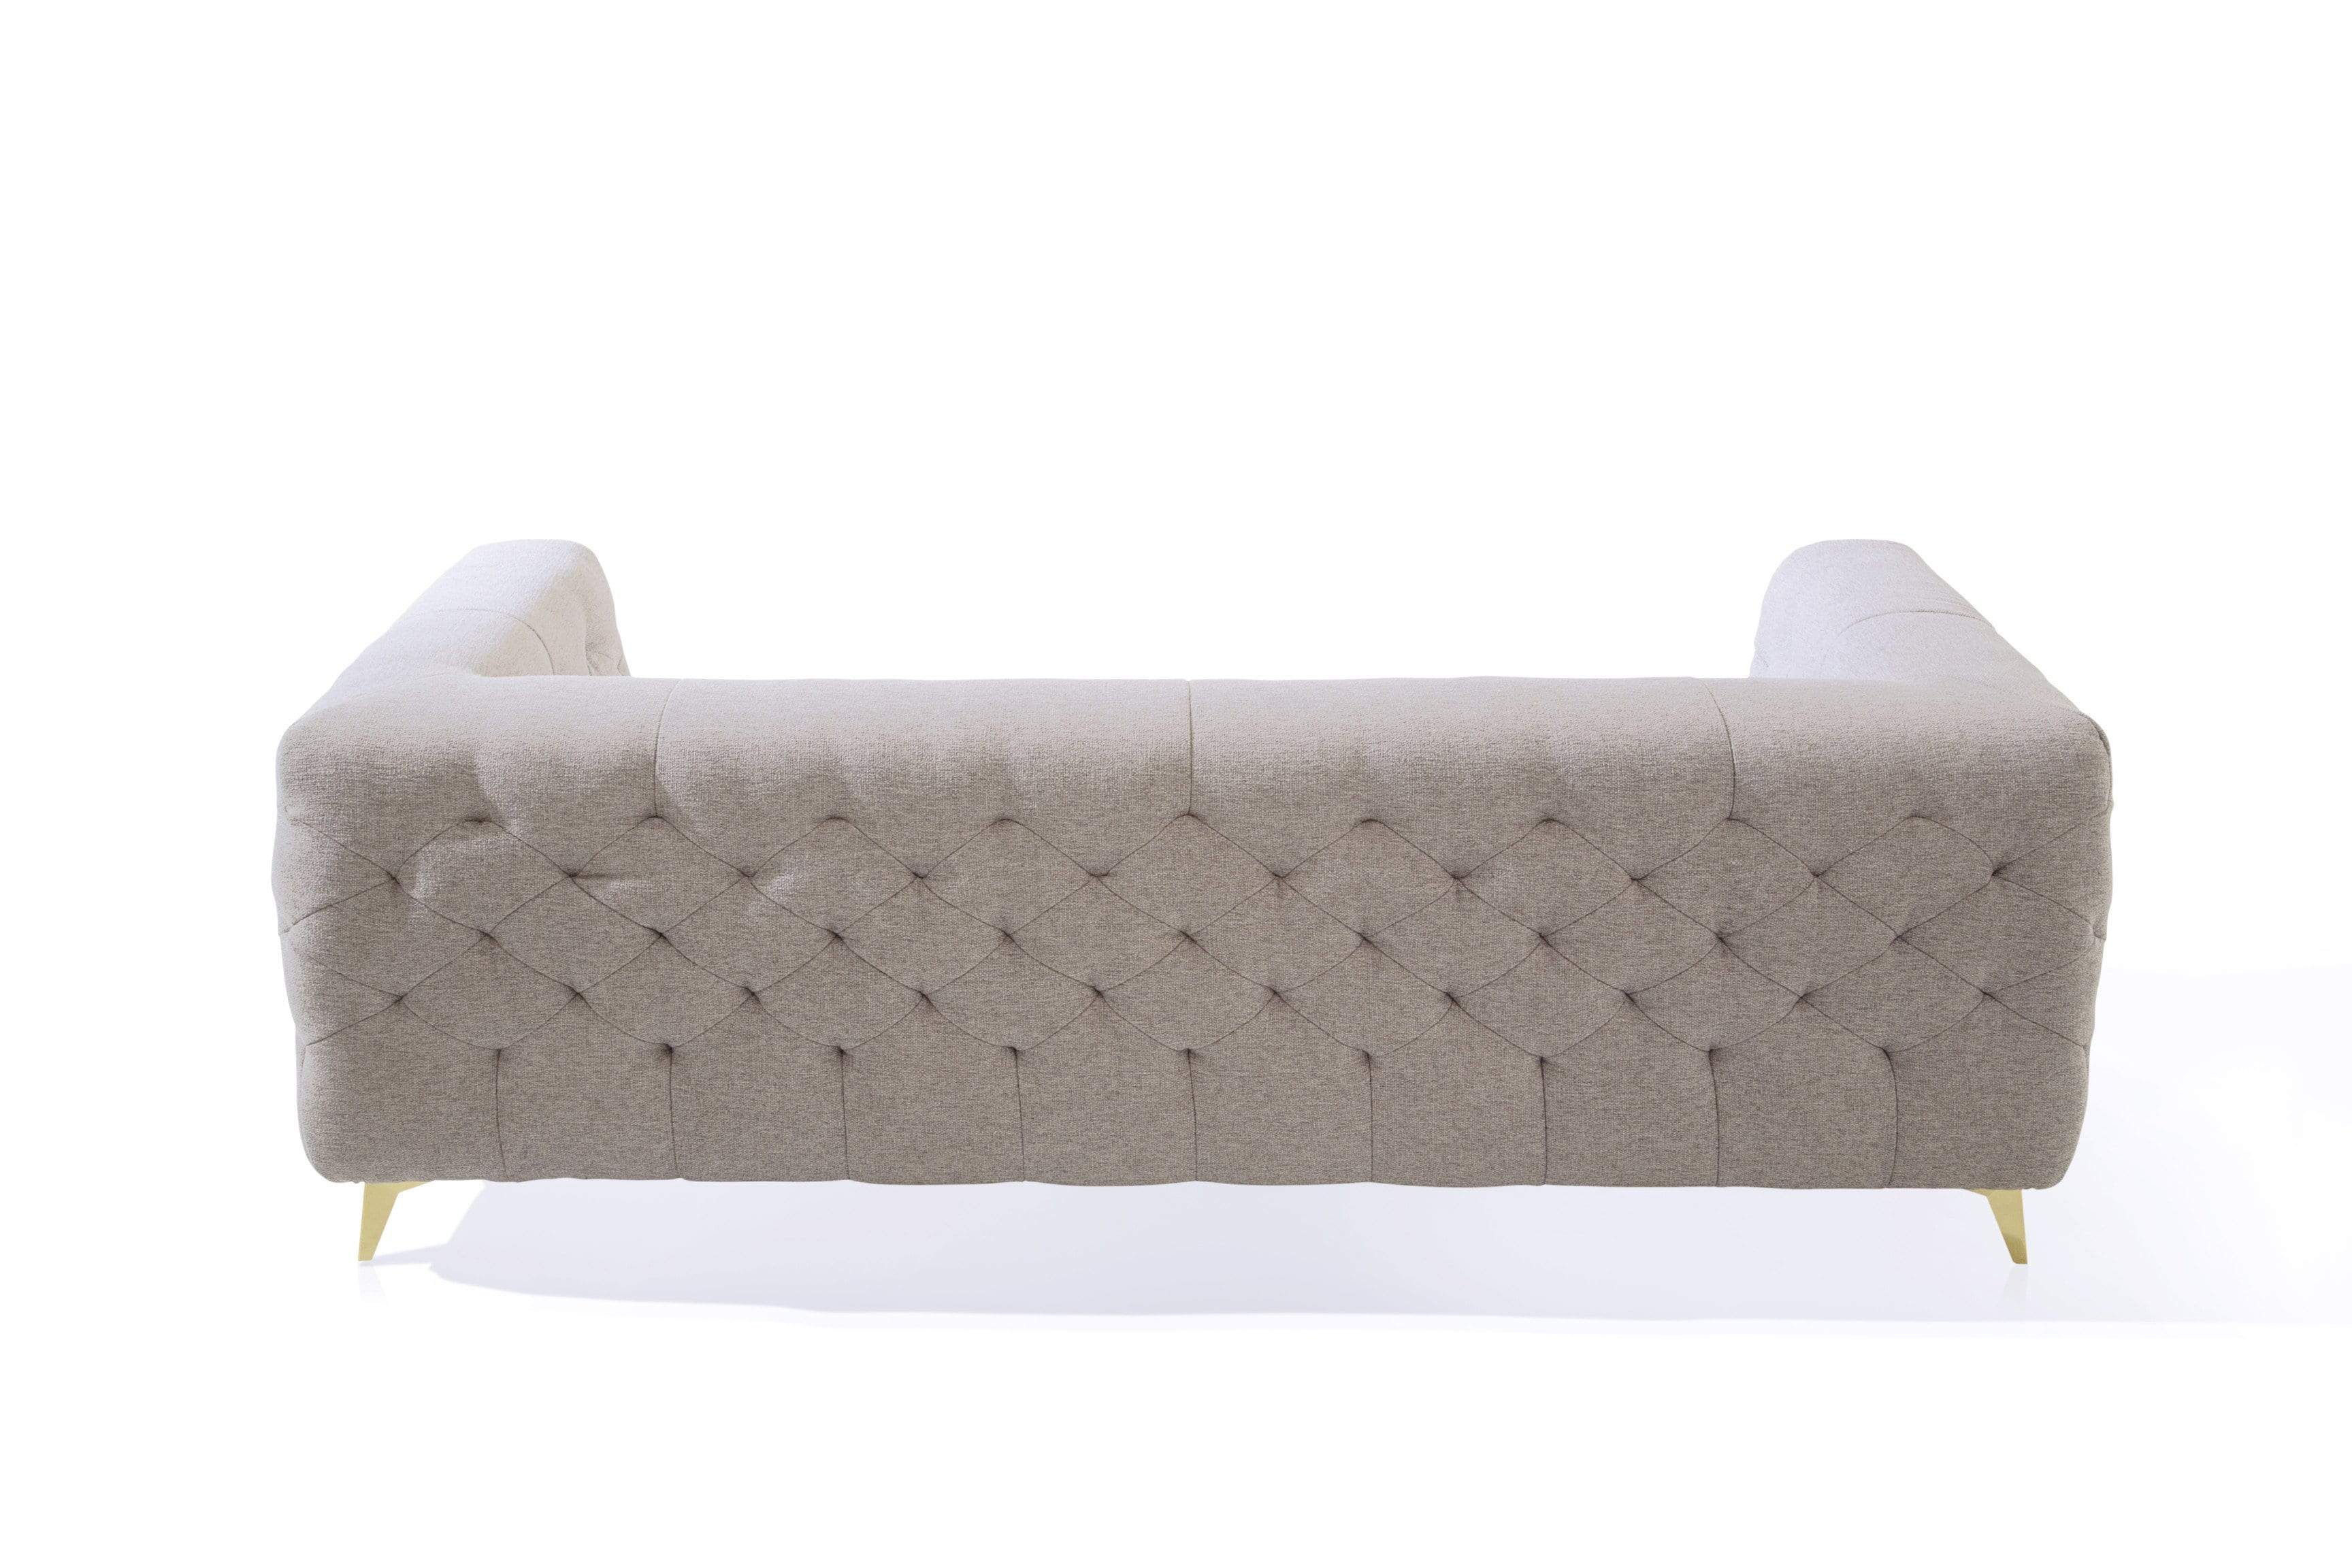 Carlyle Sofa Linen Textured Upholstery Tufted Shelter Arm Gold Tone Metal Legs